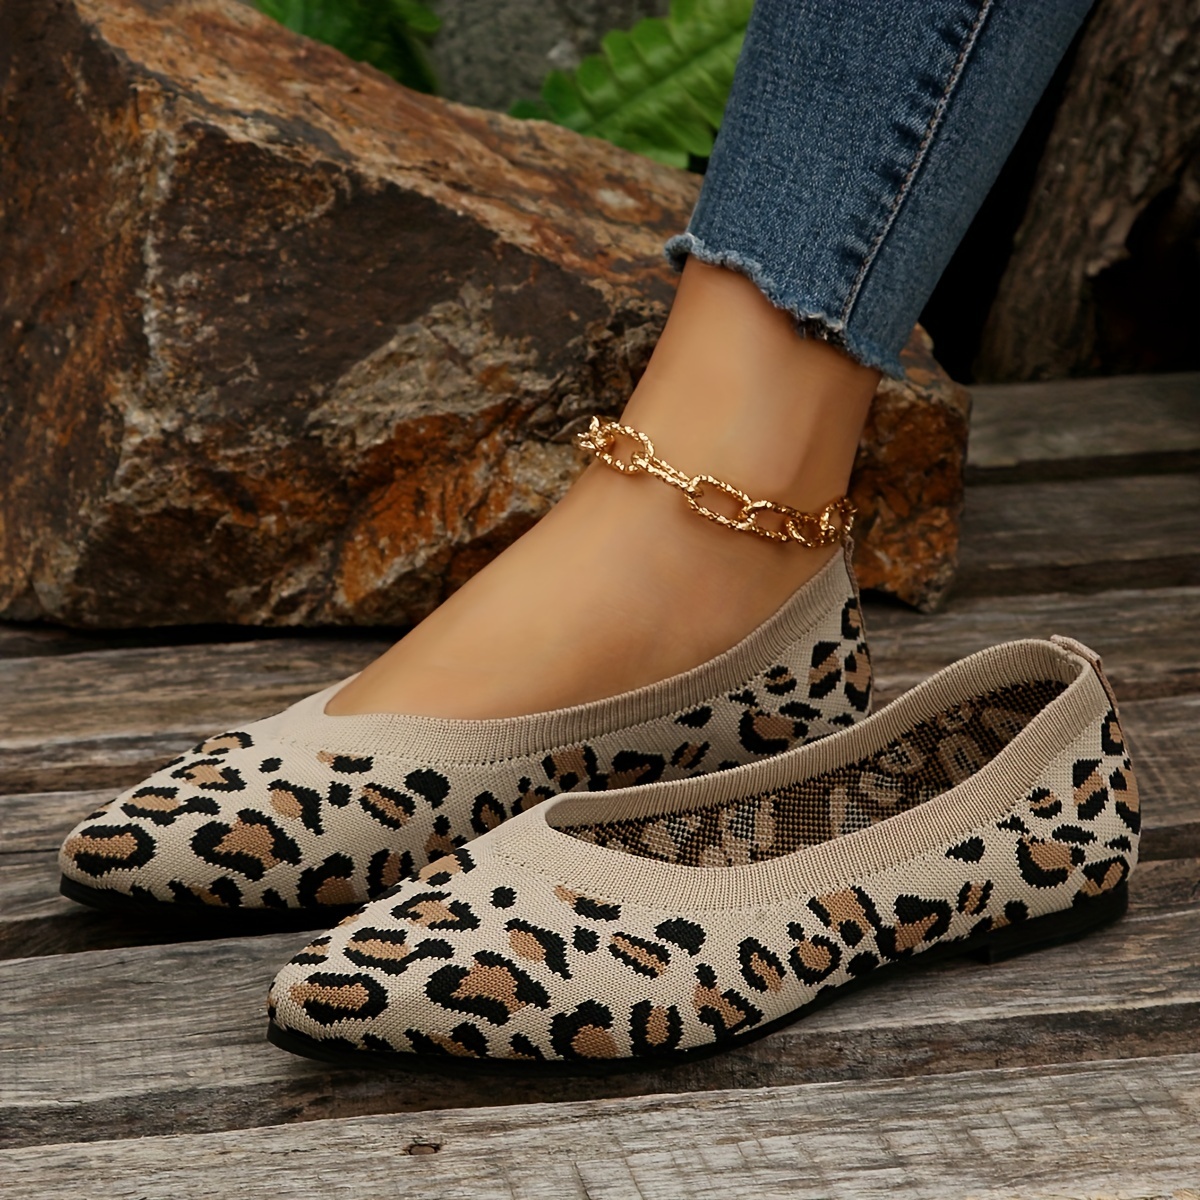 Leopard Print Pointed Flats, Animal Print Shoes Women, Loafer